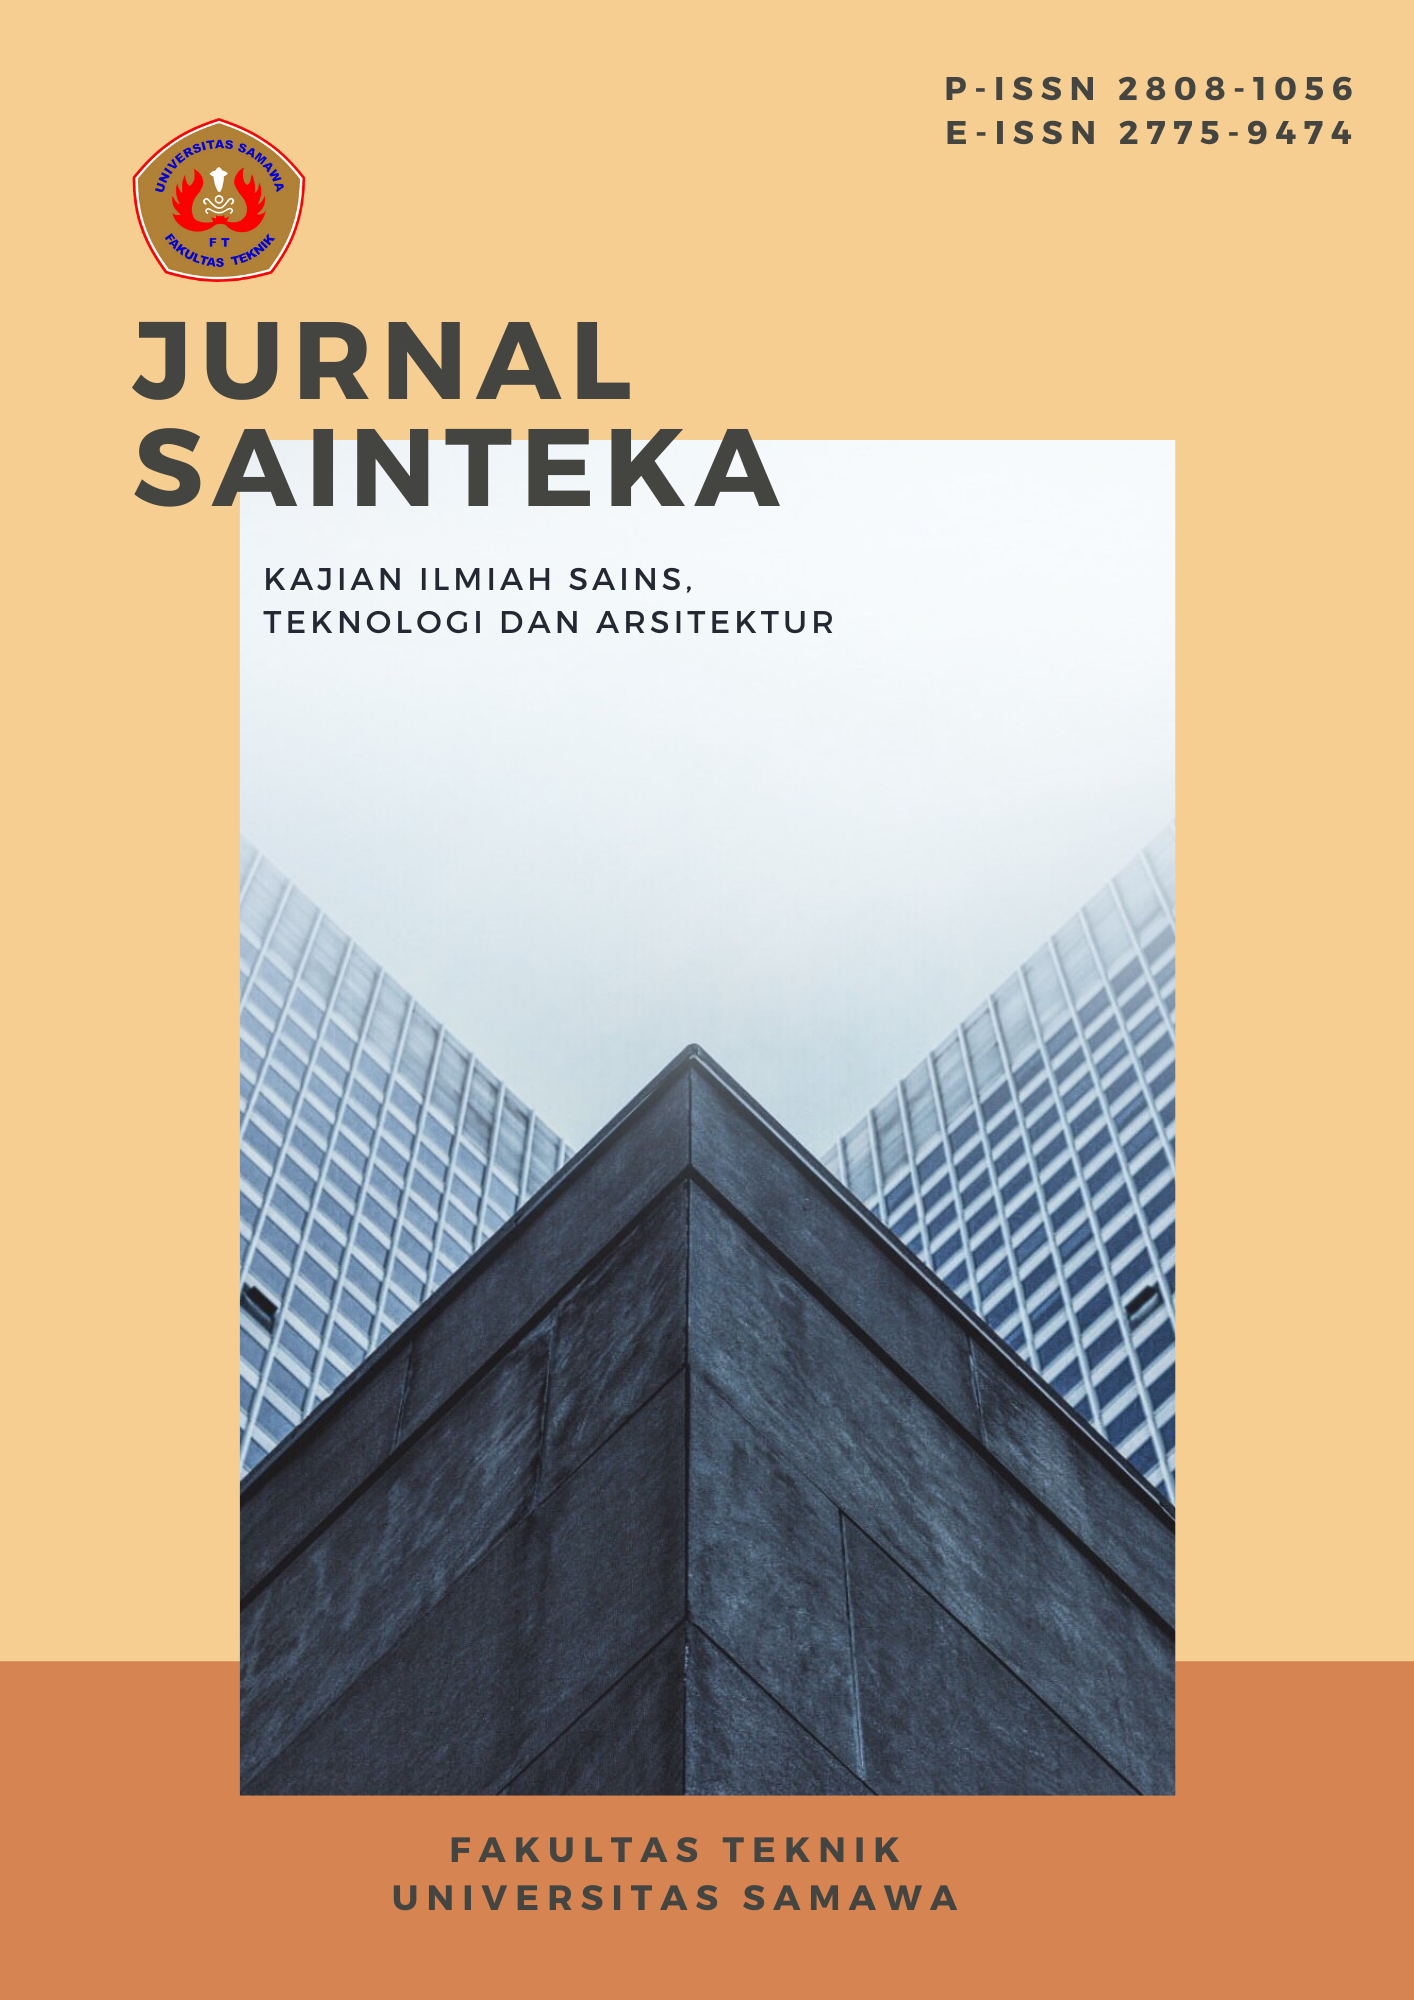 Sainteka is a scientific journal that is managed and published by the Lembaga Penelitian dan Pengabdian kepada Masyarakat (LPPM), Universitas Samawa. Sainteka contains the publication of research results from students, lecturers and or other practitioners in the field of science and technology in civil engineering, mechanical engineering and architectural and focus on the fields of built environment, structural engineering, materials engineering, geotechnics, hydraulics engineering, construction building  and sustainable energy. Sainteka is published every 3 times a year (Febaruary, June, and October).